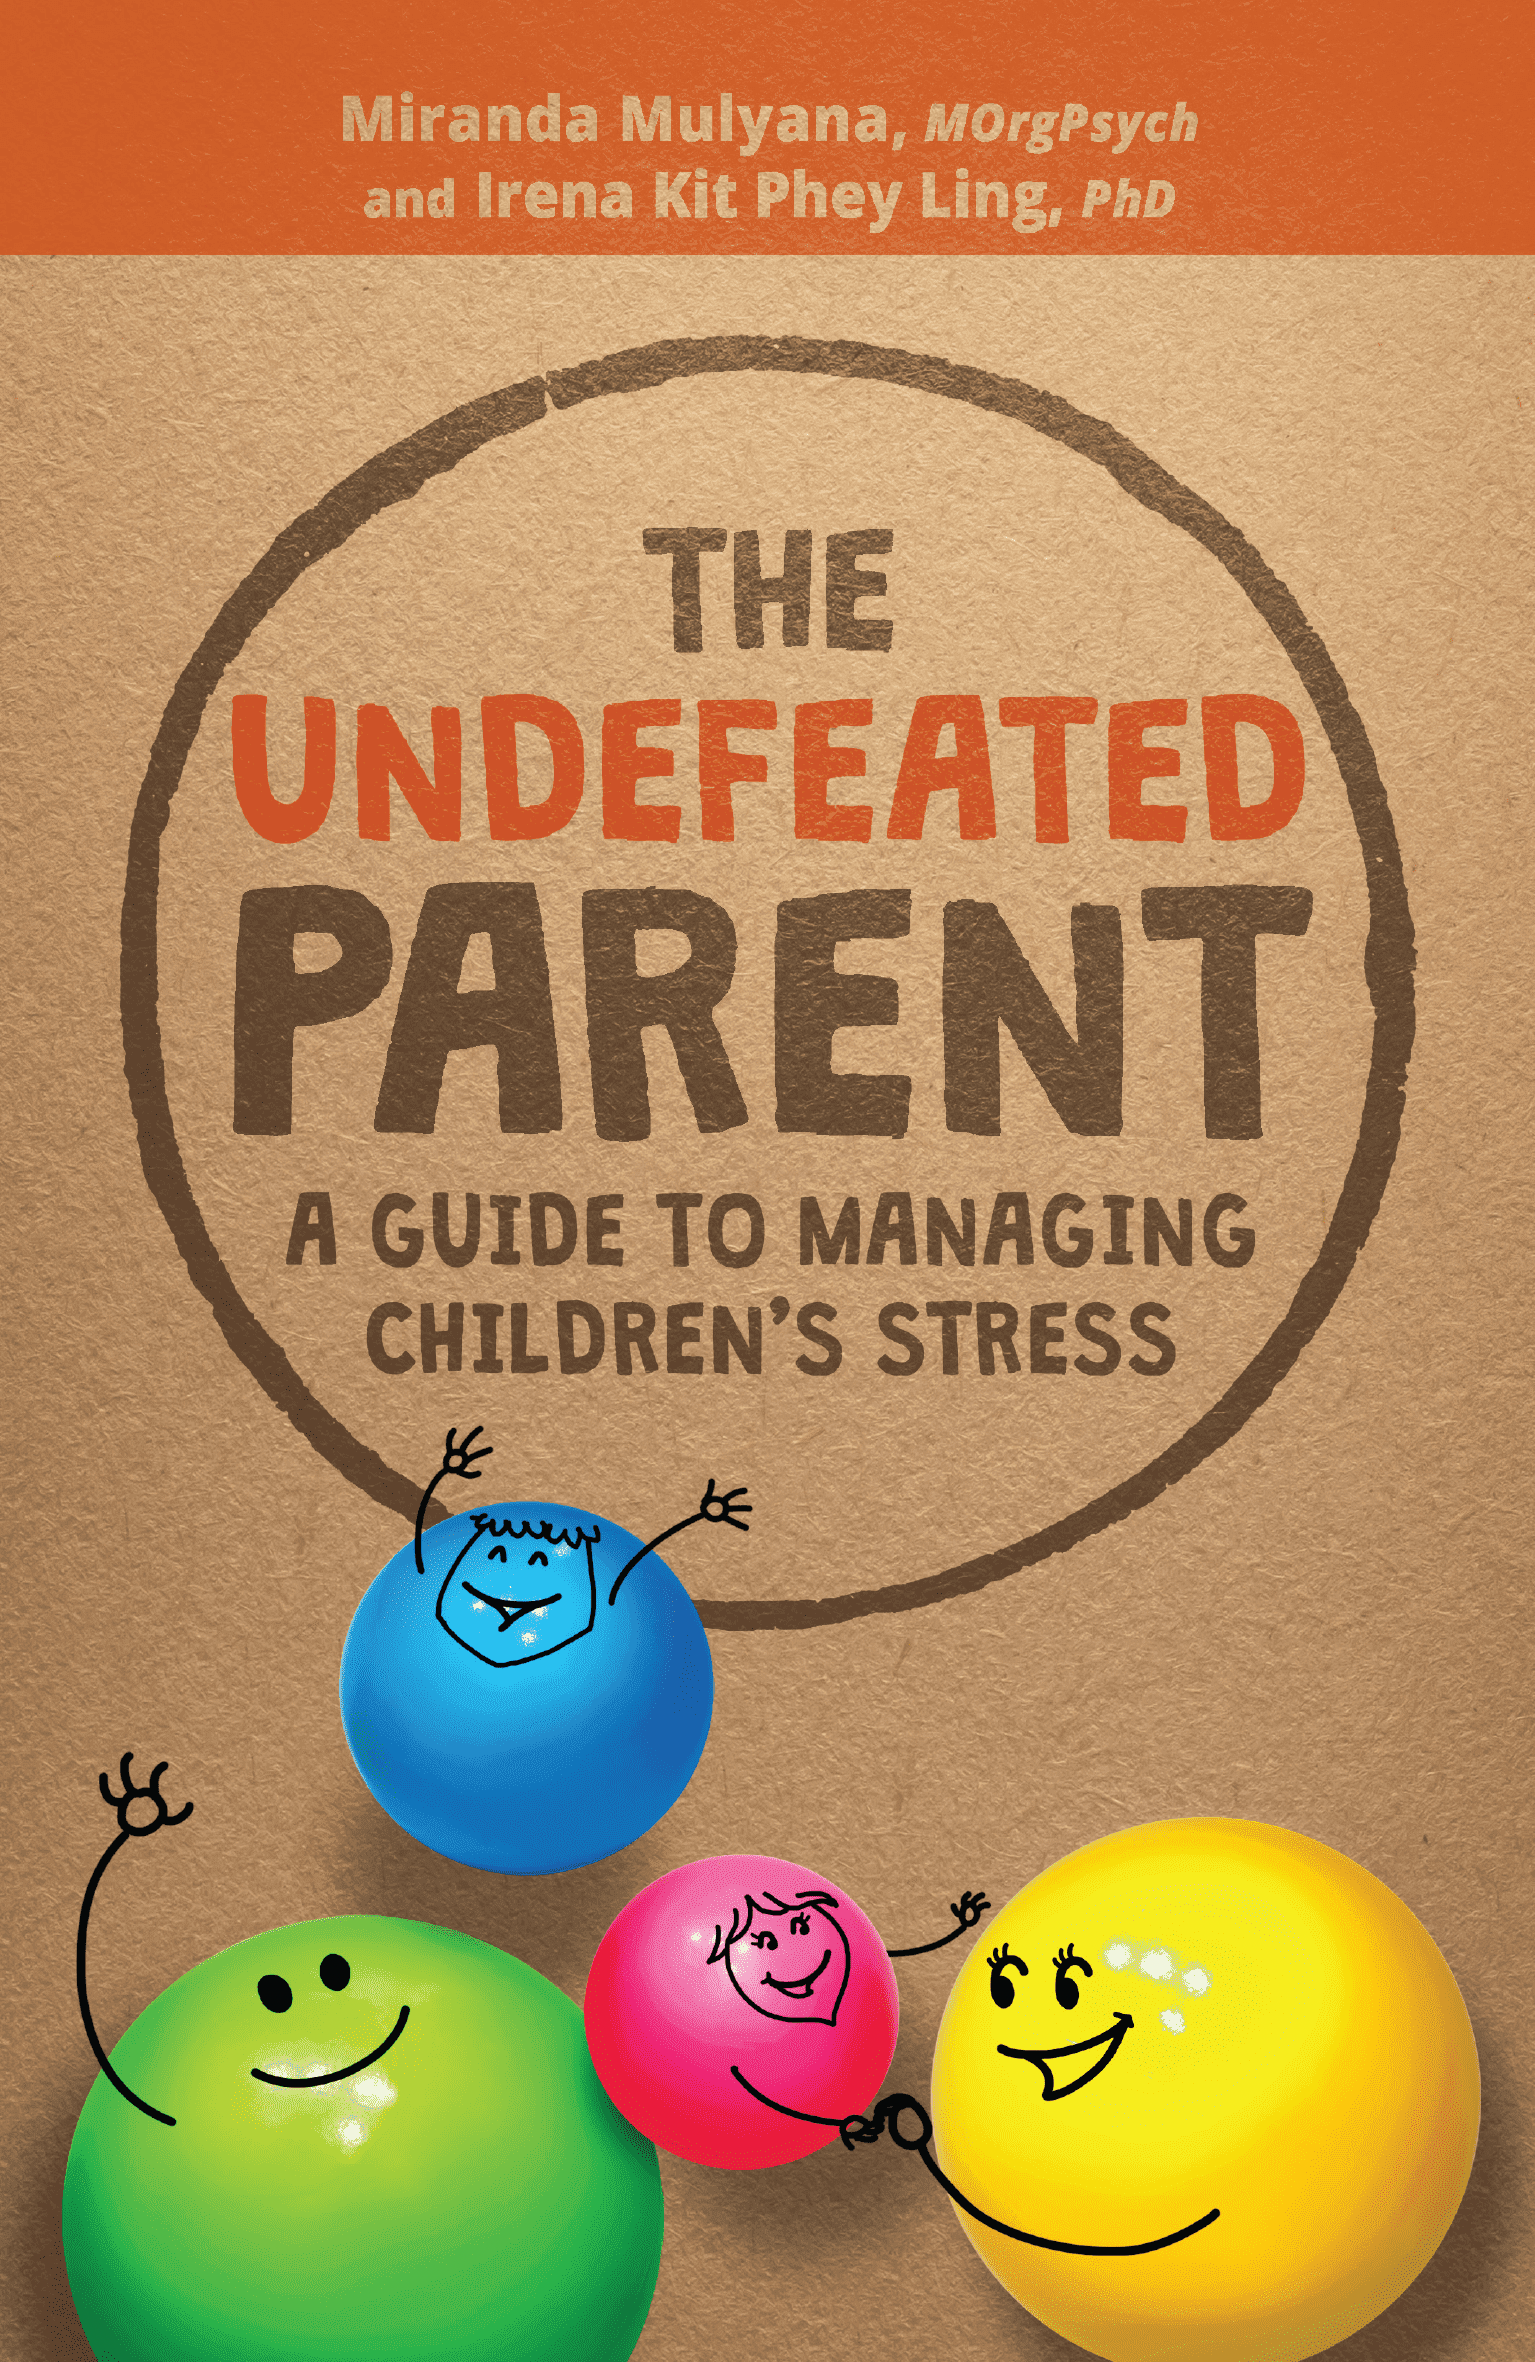 The Undefeated Parent: A Guide to Managing Children's Stress